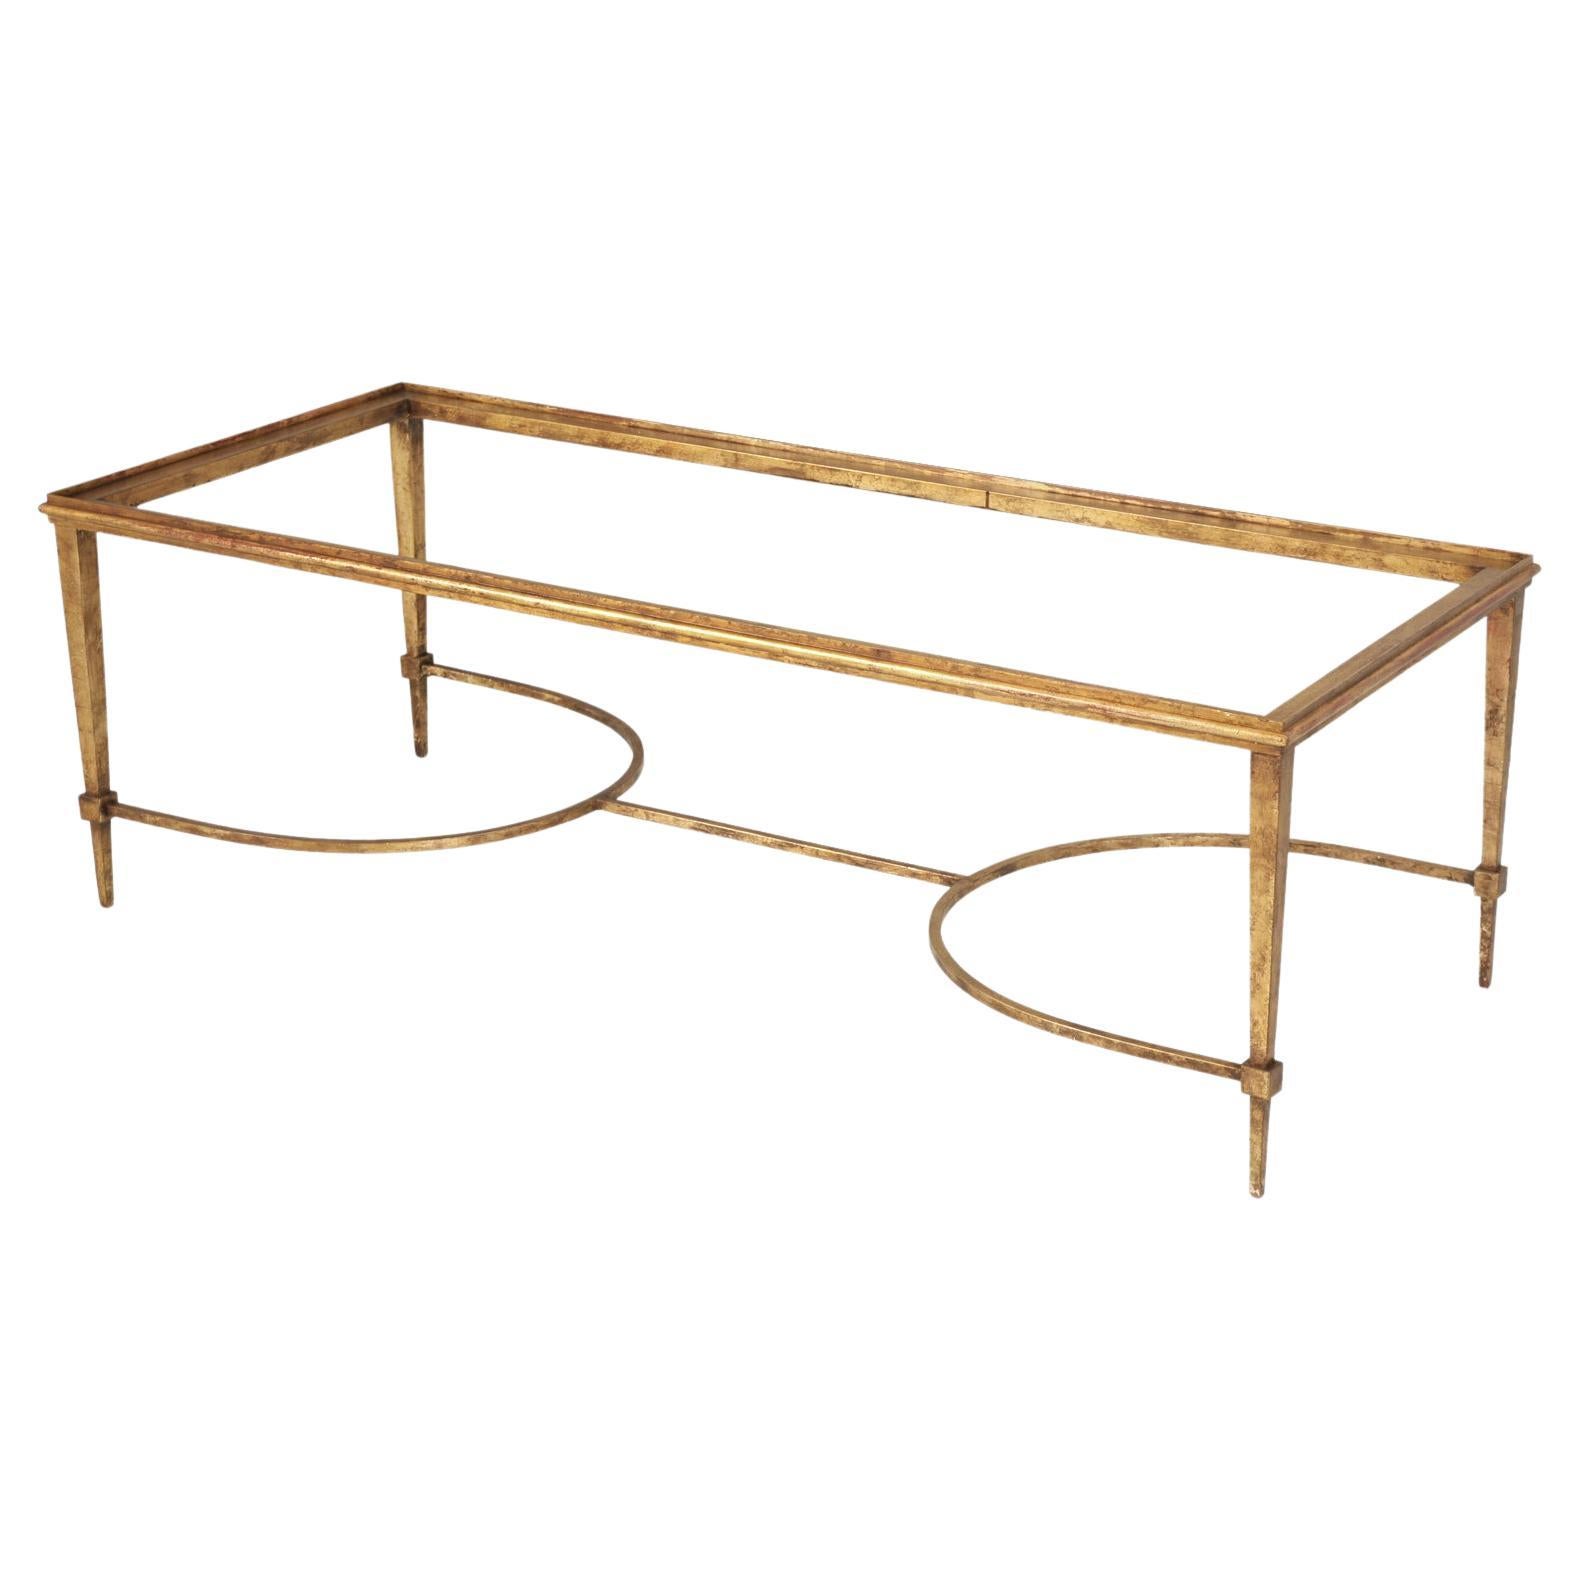 French Maison Ramsey Inspired Gilt-Iron Coffee Table Hand-Made to Order Locally For Sale